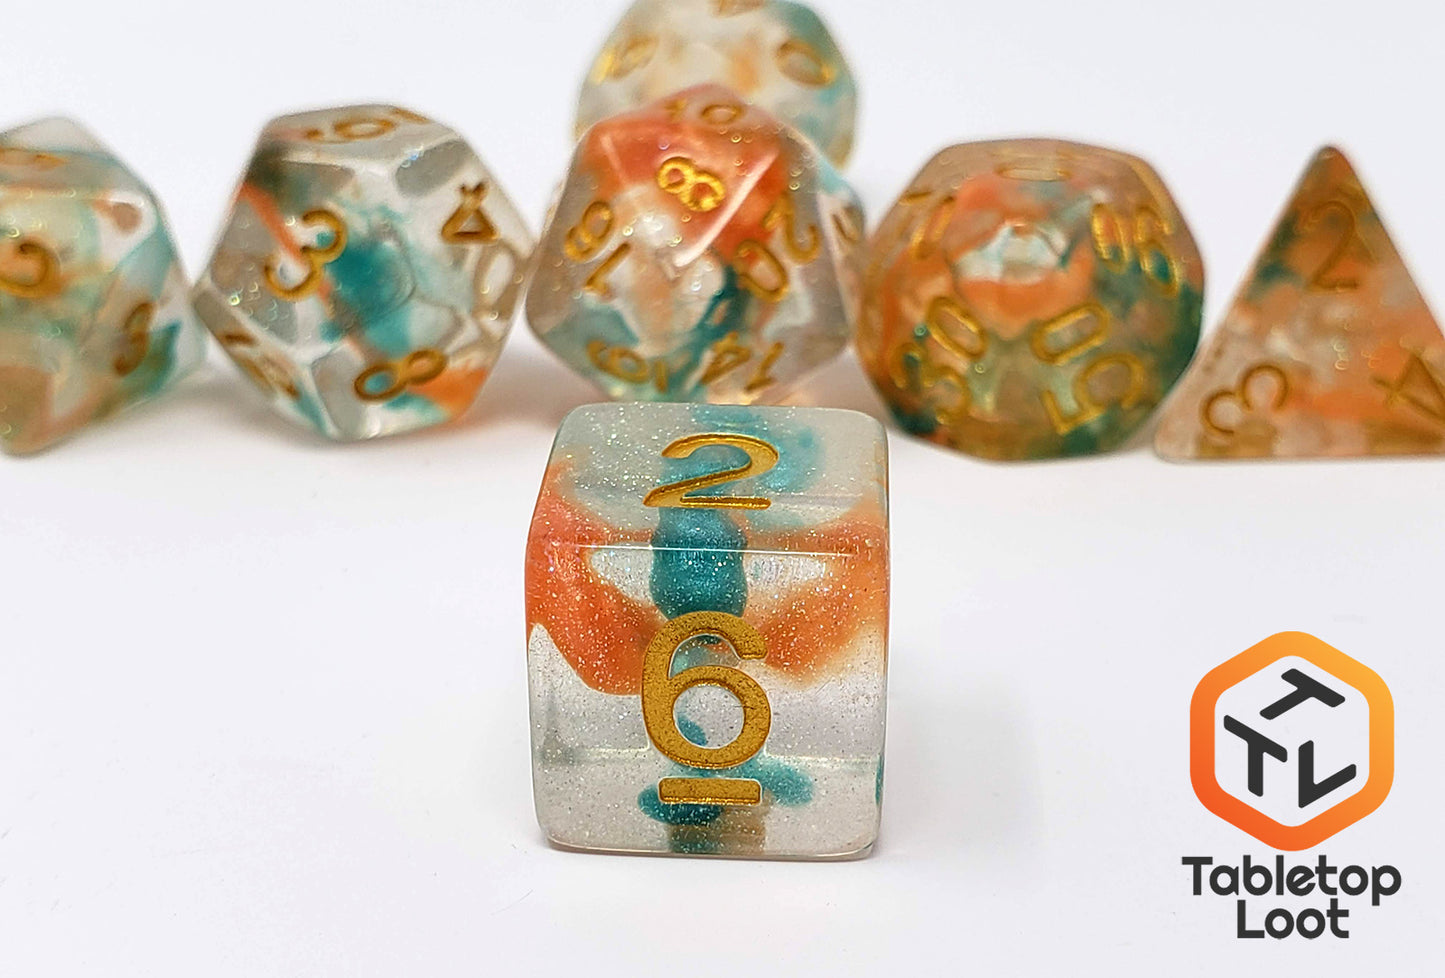 A close up of the Luminous Koi 7 piece dice set from Tabletop Loot with swirls of orange and blue in a clear glittery resin with gold numbering.